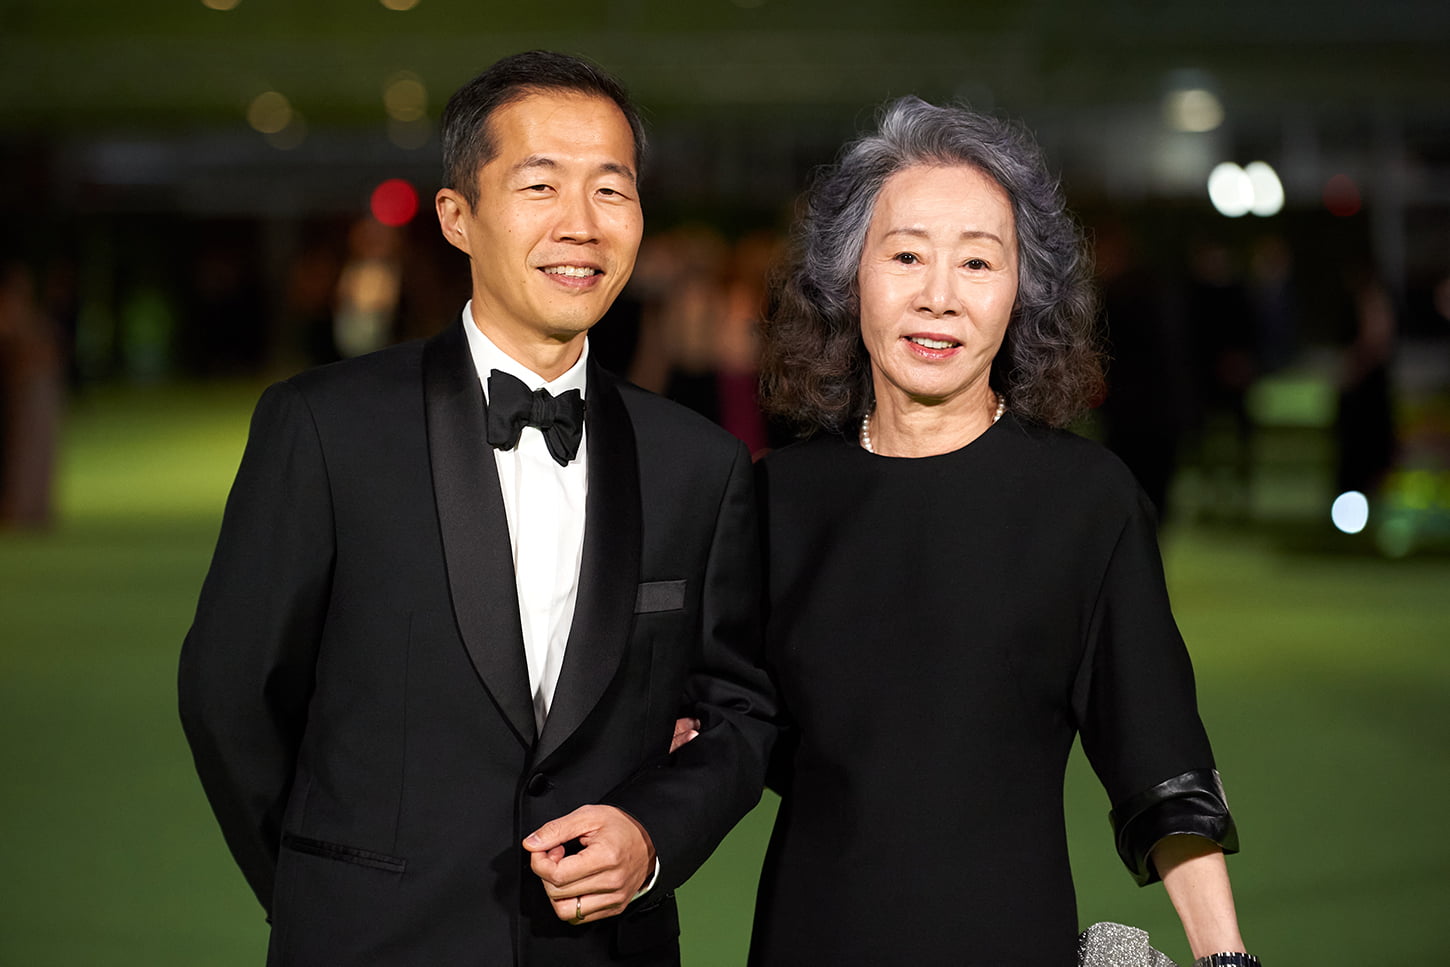 Lee Isaac Chung,Yuh-Jung Youn attend the Academy Museum of Motion Pictures Opening Gala, September 25, 2021